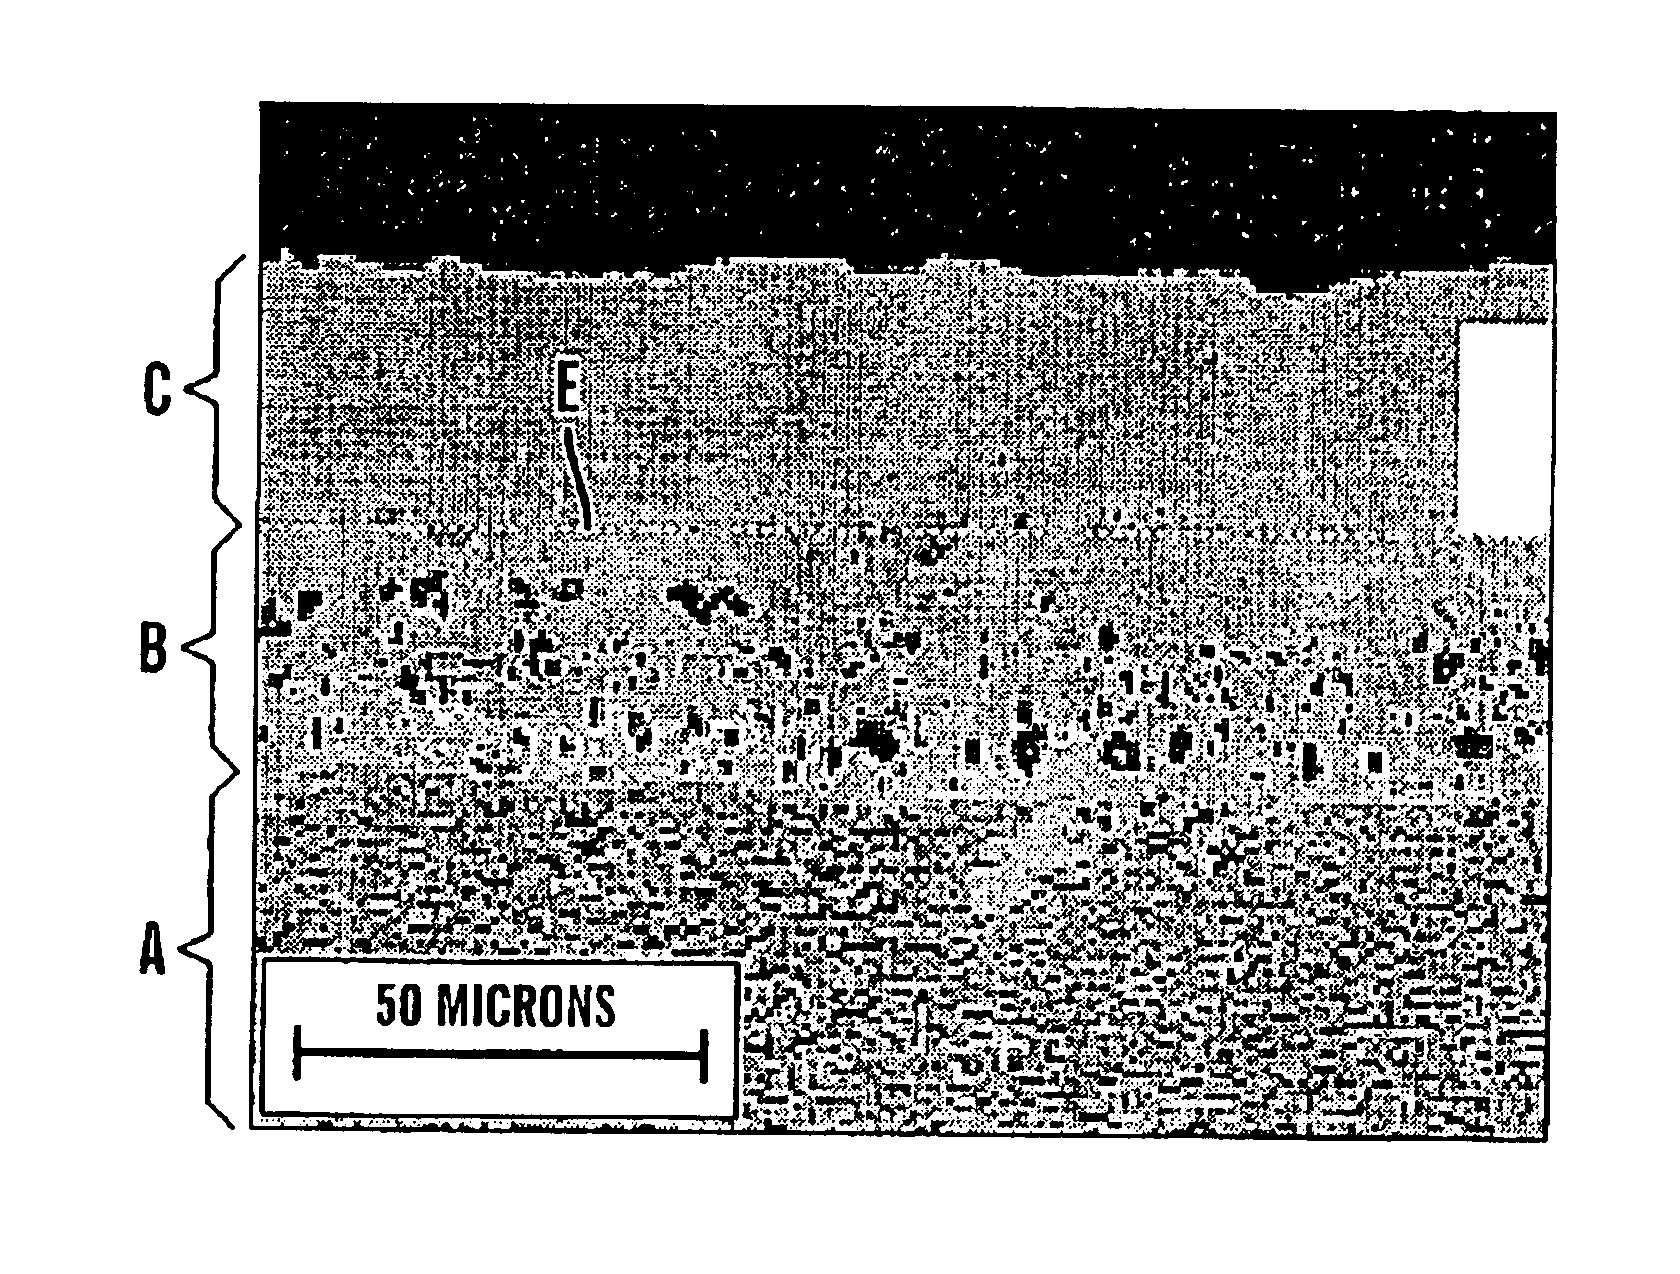 Process for partial stripping of diffusion aluminide coatings from metal substrates, and related compositions